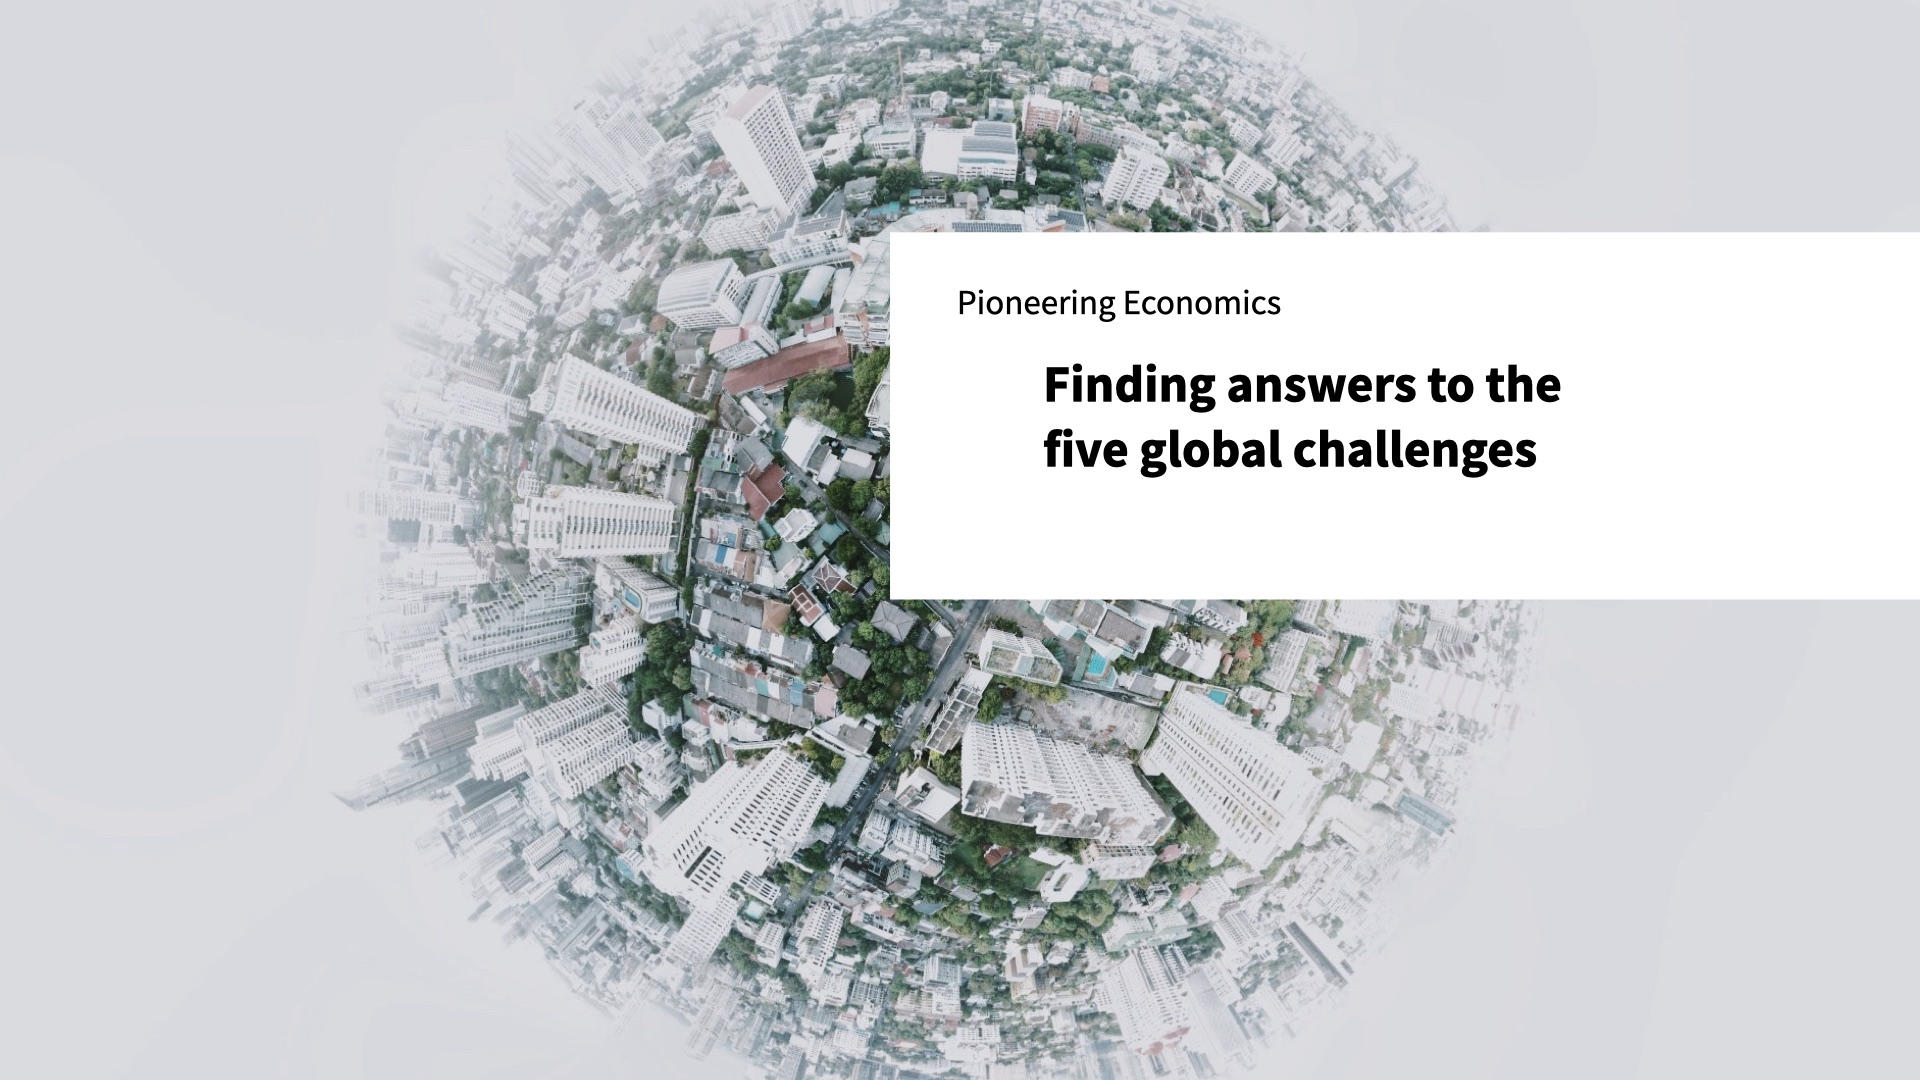 Picture: Finding answers to the five global challenges